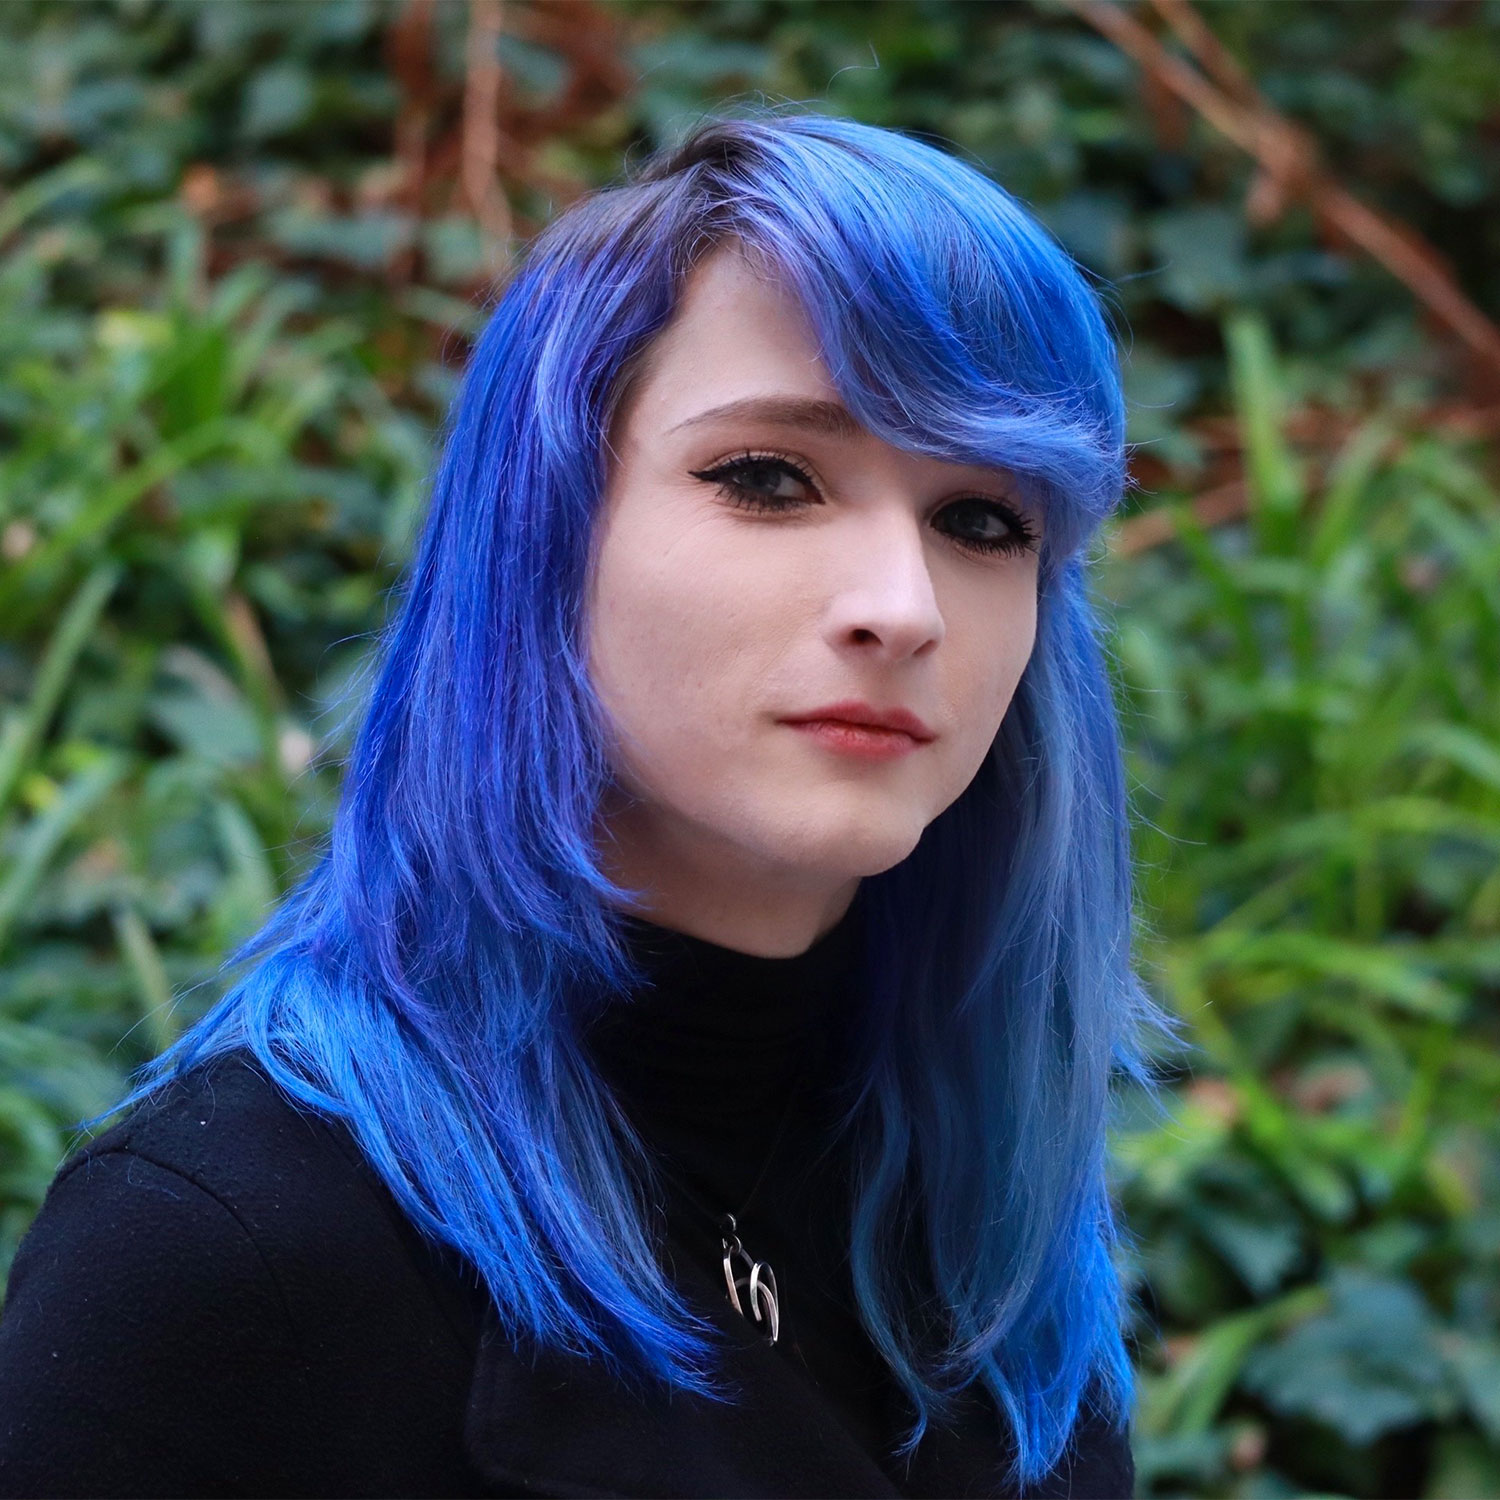 Headshot of scholar. Green plants behind scholar. Scholar has medium length bright blue hair, red lipstick. They are wearing a black long sleeve shirt and a necklace with a silver pendant. They have black eyeliner and red lips